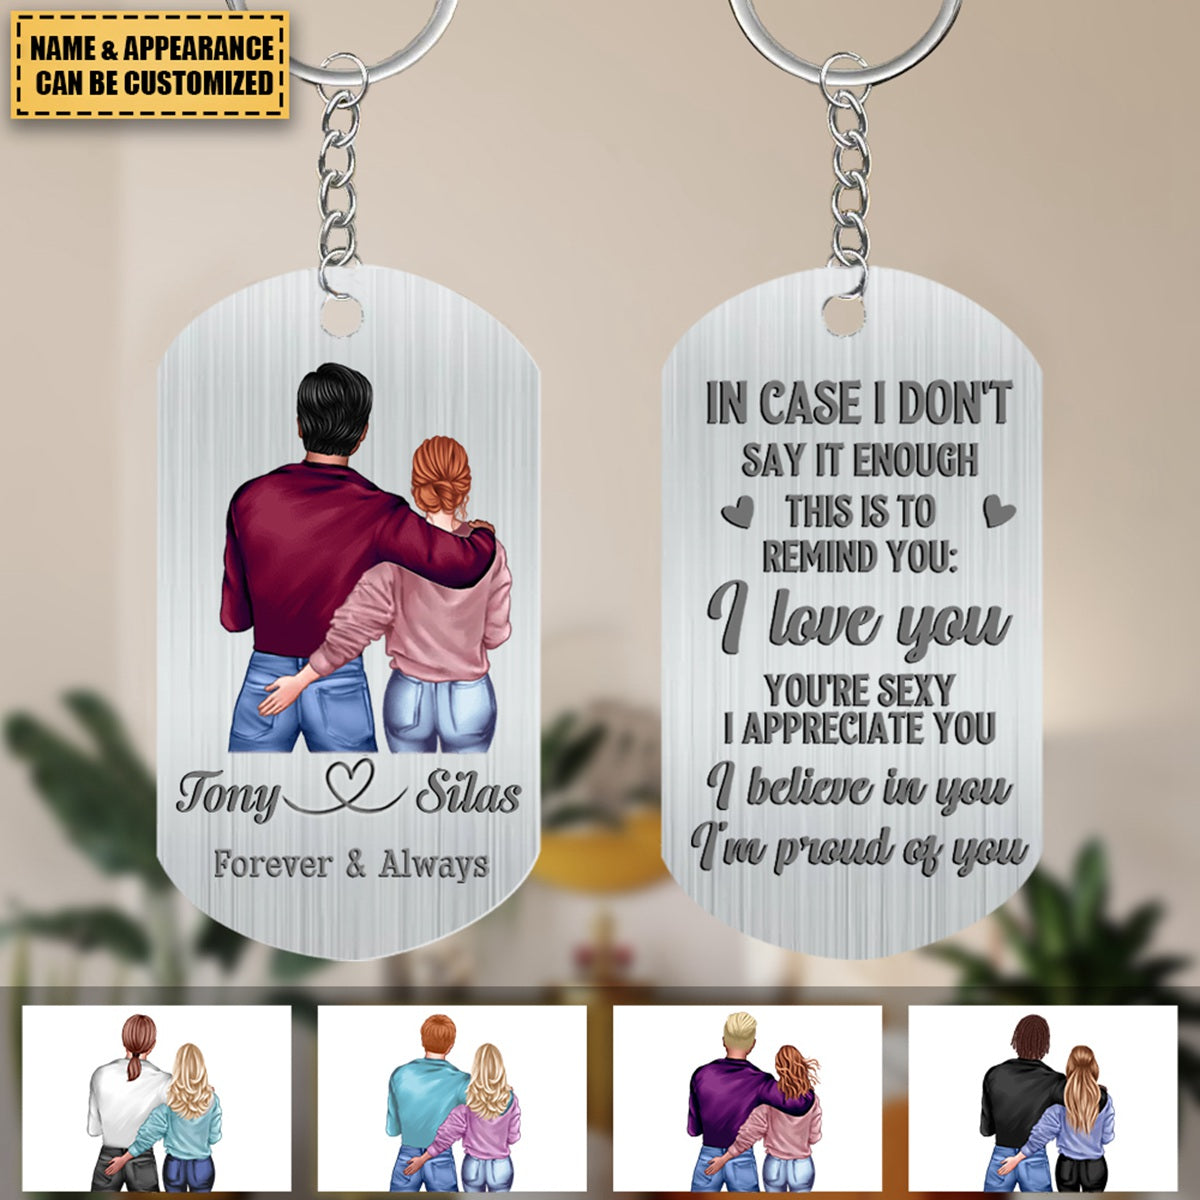 In Case I Don't Say It Enough - Personalized Stainless Steel Keychain, Valentine's Day Gift For Couple